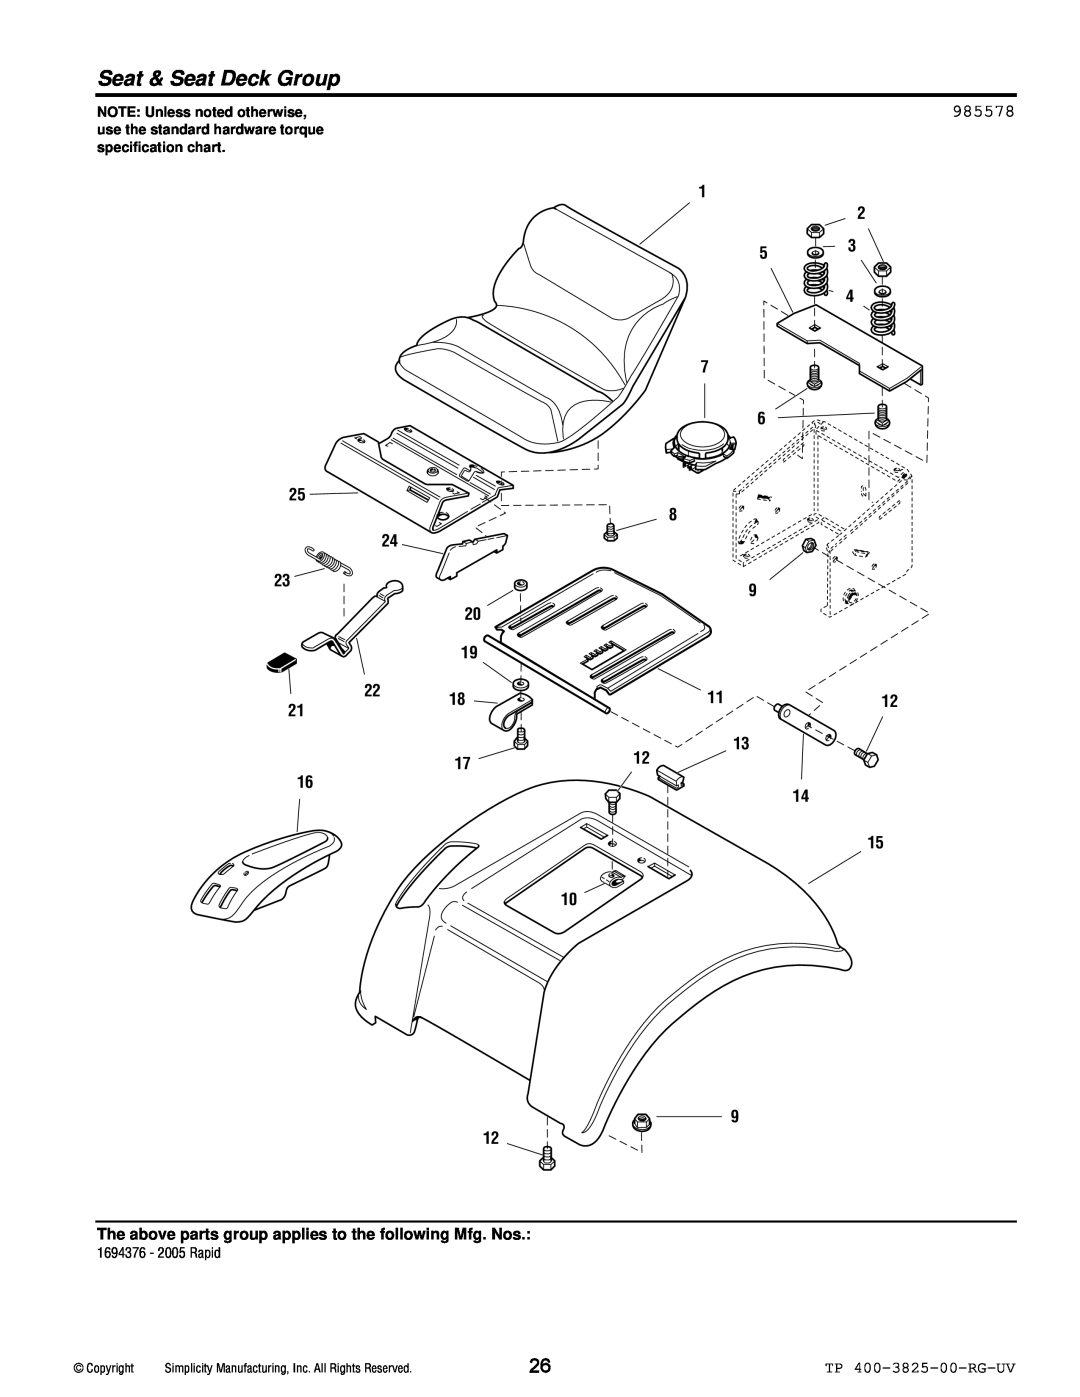 Simplicity 1694377 Seat & Seat Deck Group, 985578, The above parts group applies to the following Mfg. Nos, Copyright 